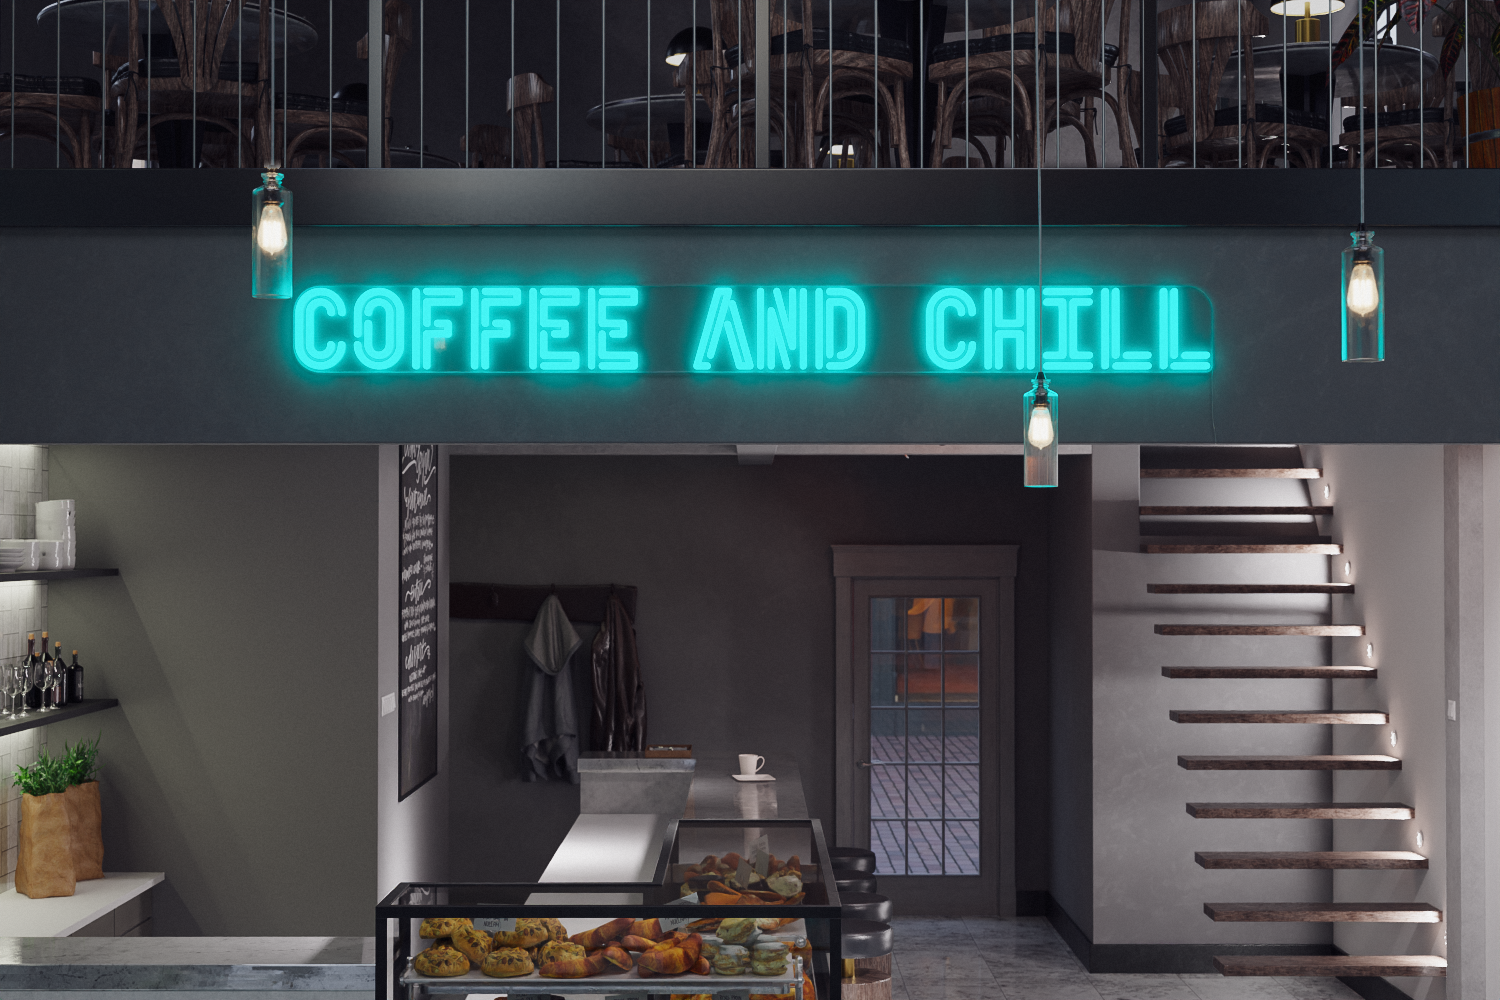 a blue neon sign in a cafe that says "coffee and chill"